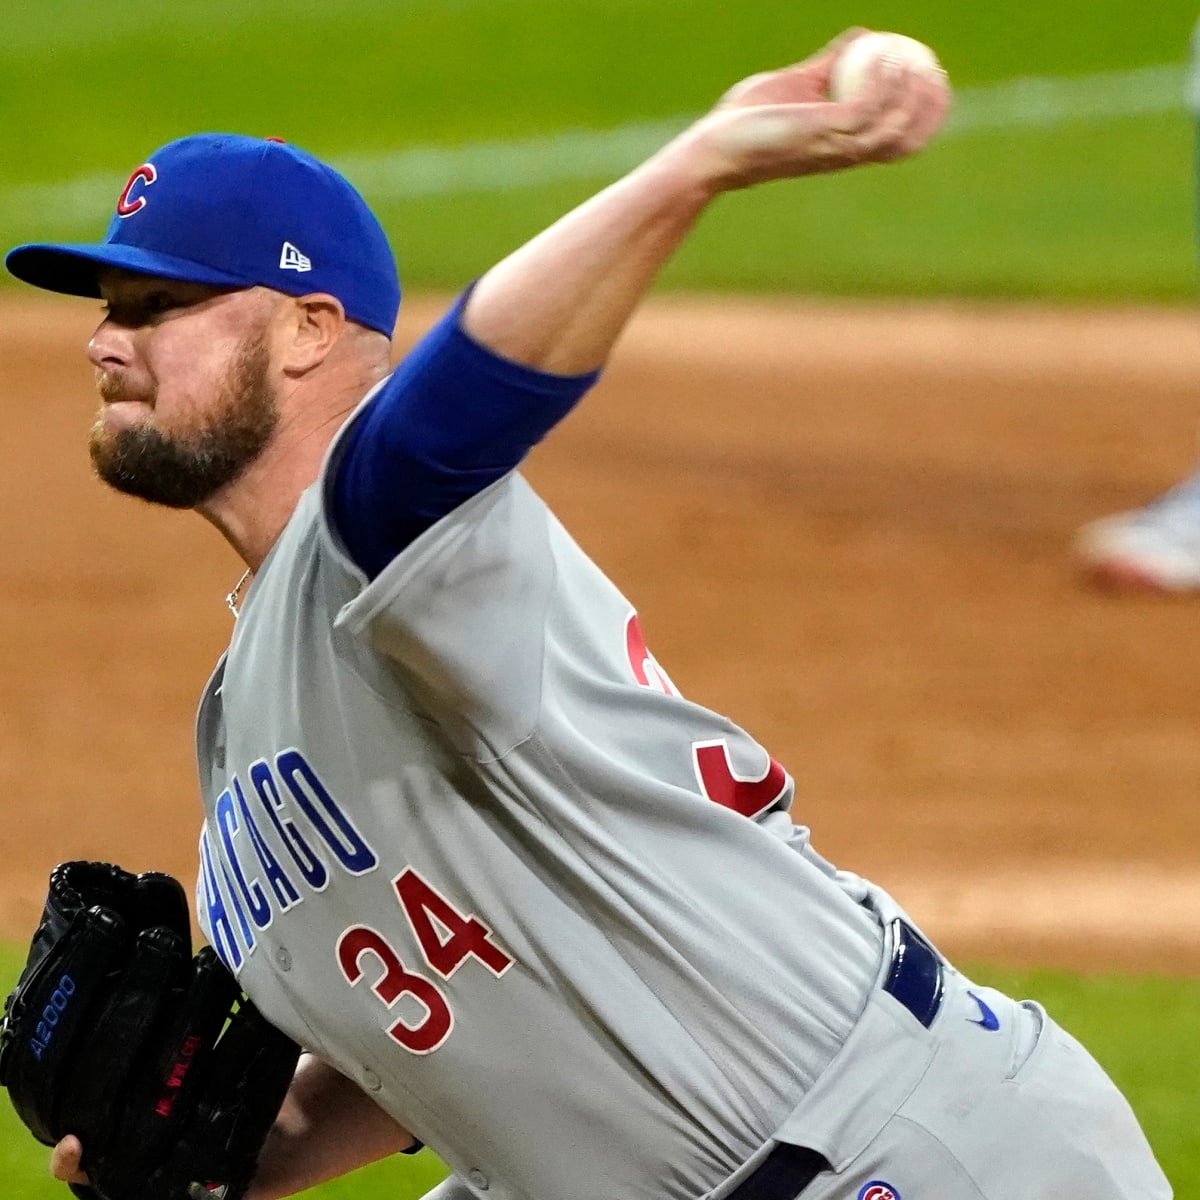 Red Sox praise pitcher Lester